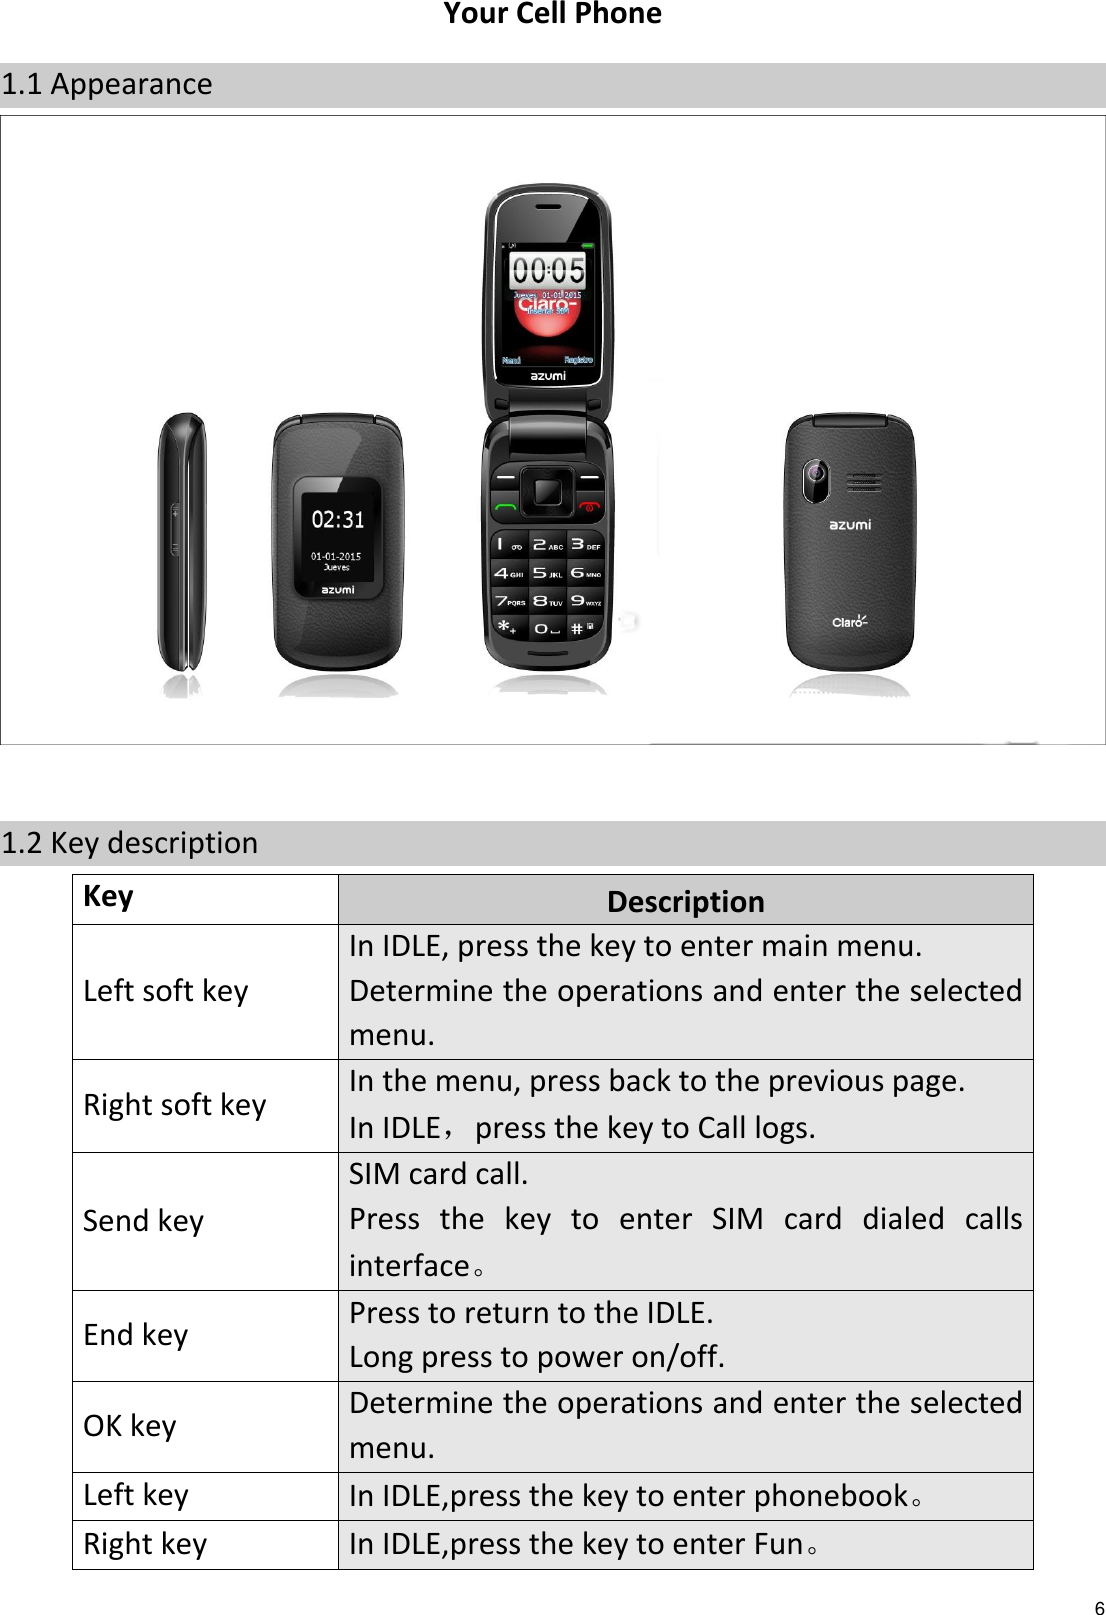 6  Your Cell Phone 1.1 Appearance   1.2 Key description Key Description Left soft key In IDLE, press the key to enter main menu. Determine the operations and enter the selected menu. Right soft key In the menu, press back to the previous page. In IDLE，press the key to Call logs. Send key SIM card call. Press  the  key  to  enter  SIM  card  dialed  calls interface。 End key Press to return to the IDLE. Long press to power on/off. OK key Determine the operations and enter the selected menu. Left key In IDLE,press the key to enter phonebook。 Right key In IDLE,press the key to enter Fun。 